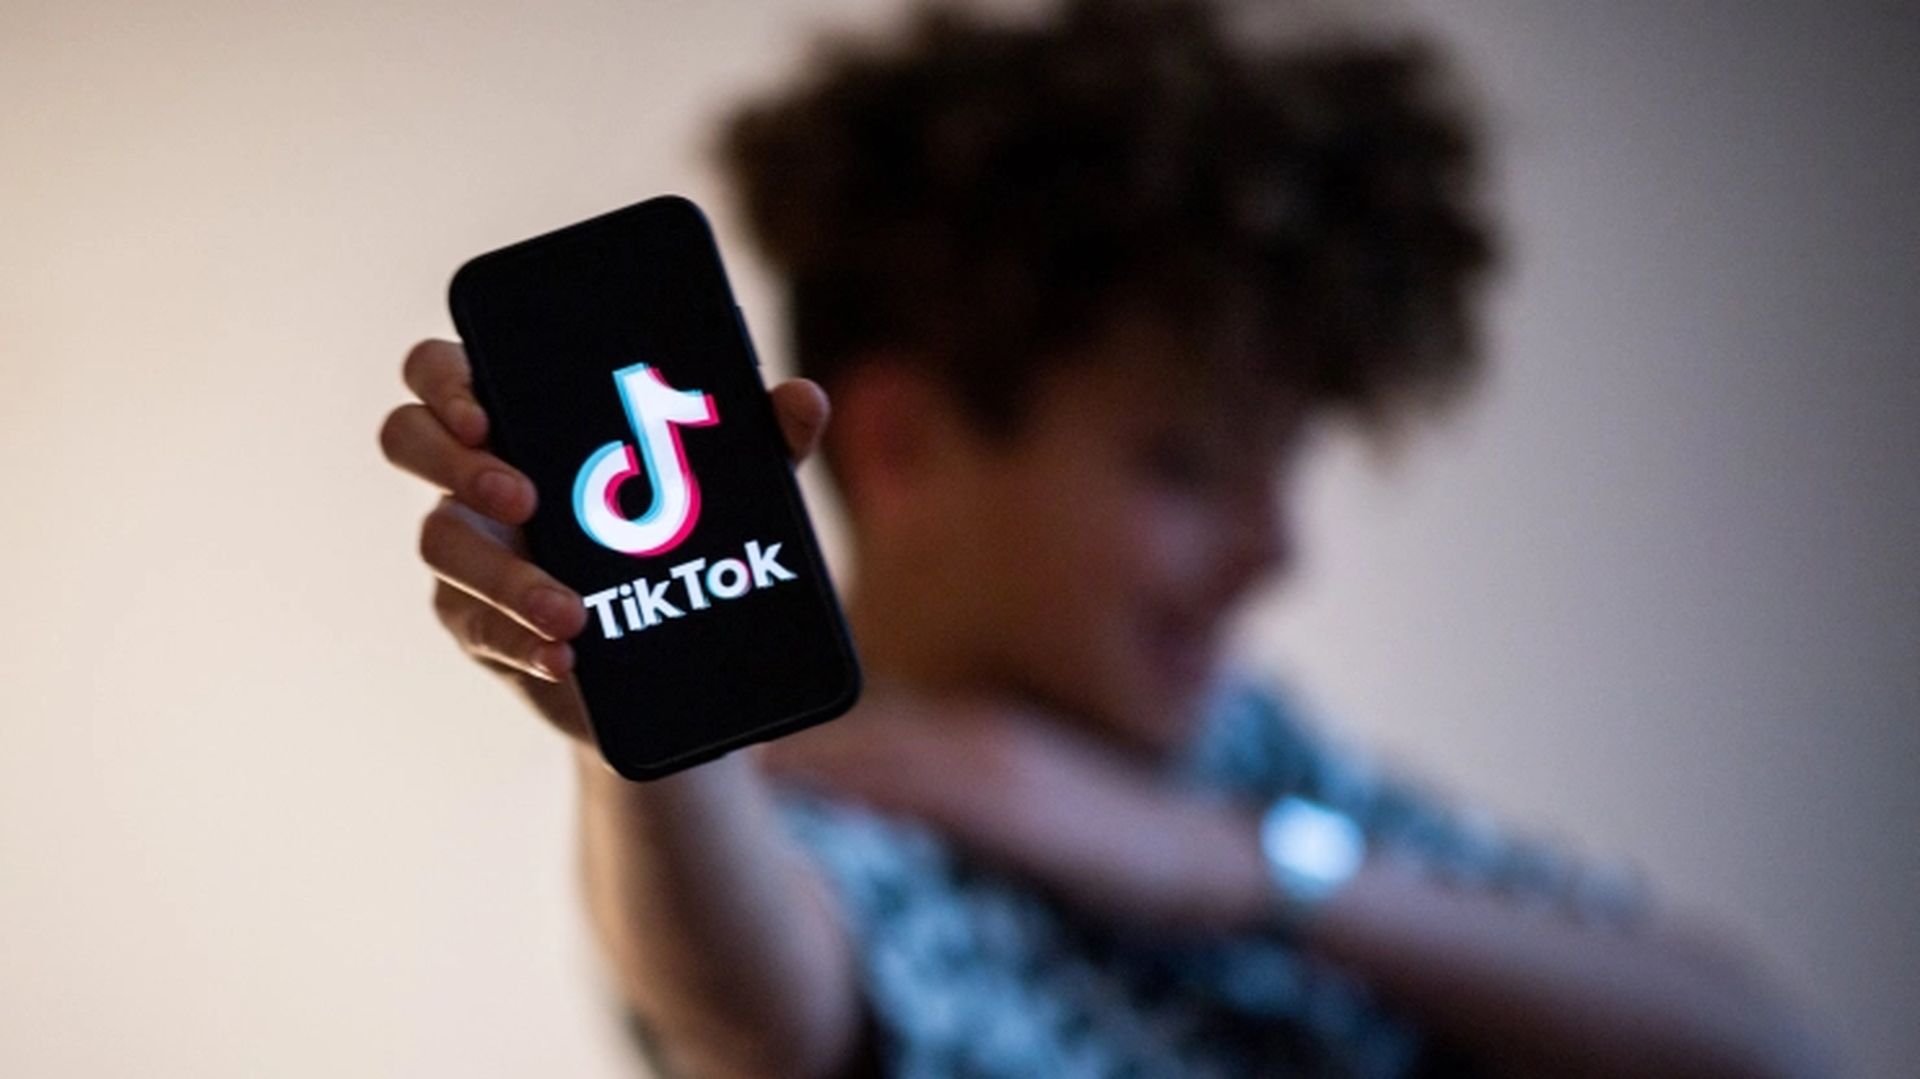 In this article, we are going to be going over how to unrepost a TikTok in 2022, so you can remove an unwanted repost from your page.